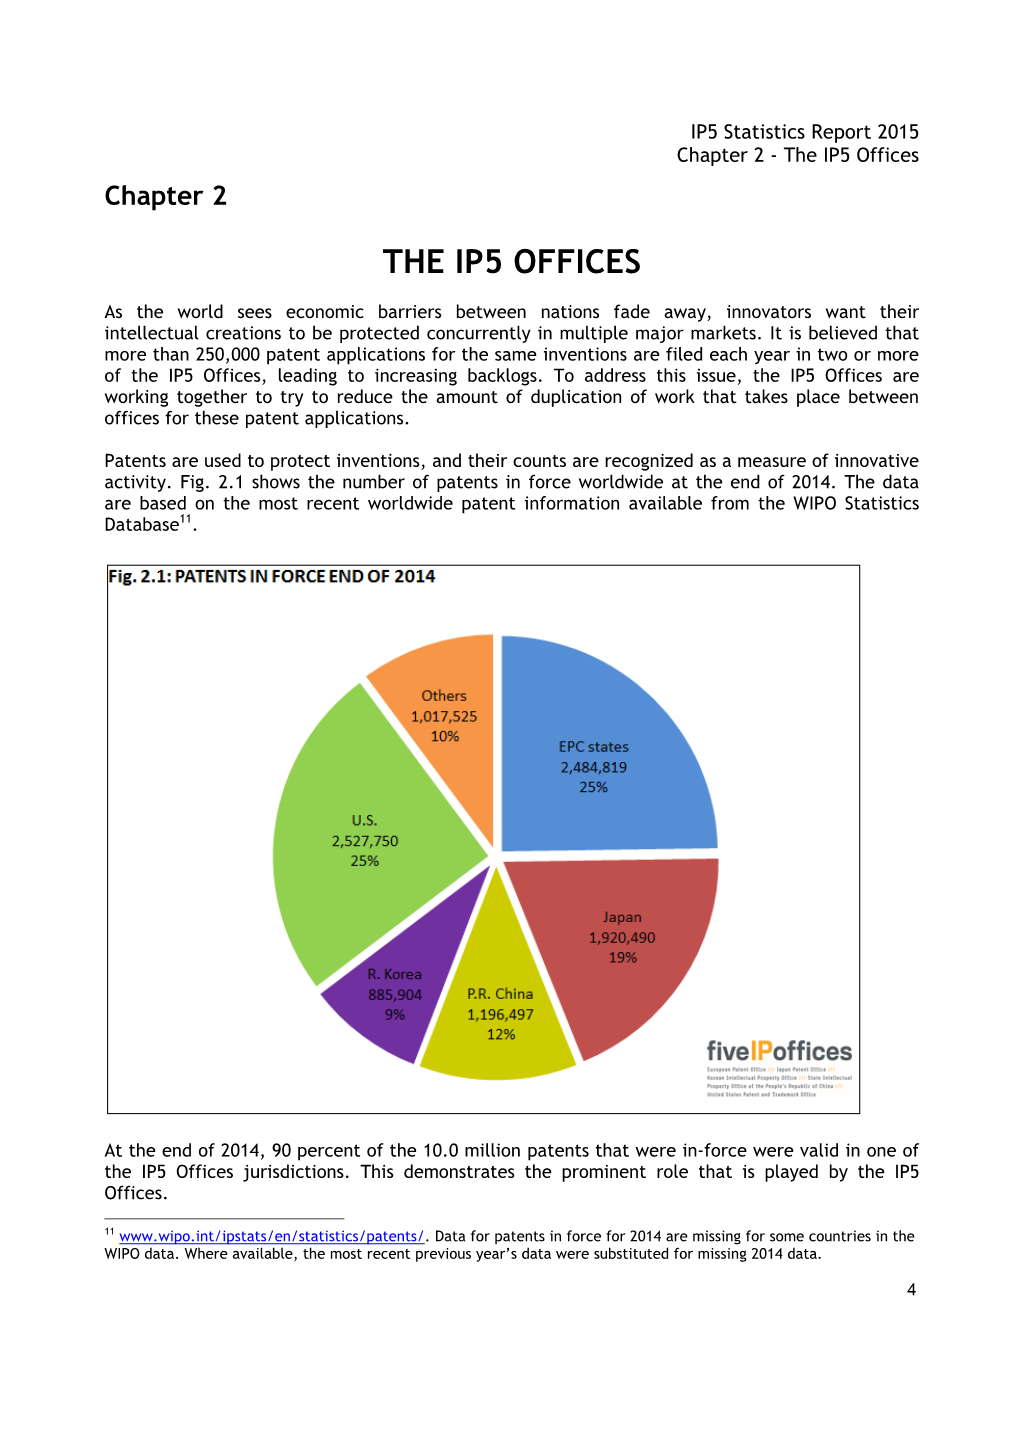 The IP5 Offices Chapter 2